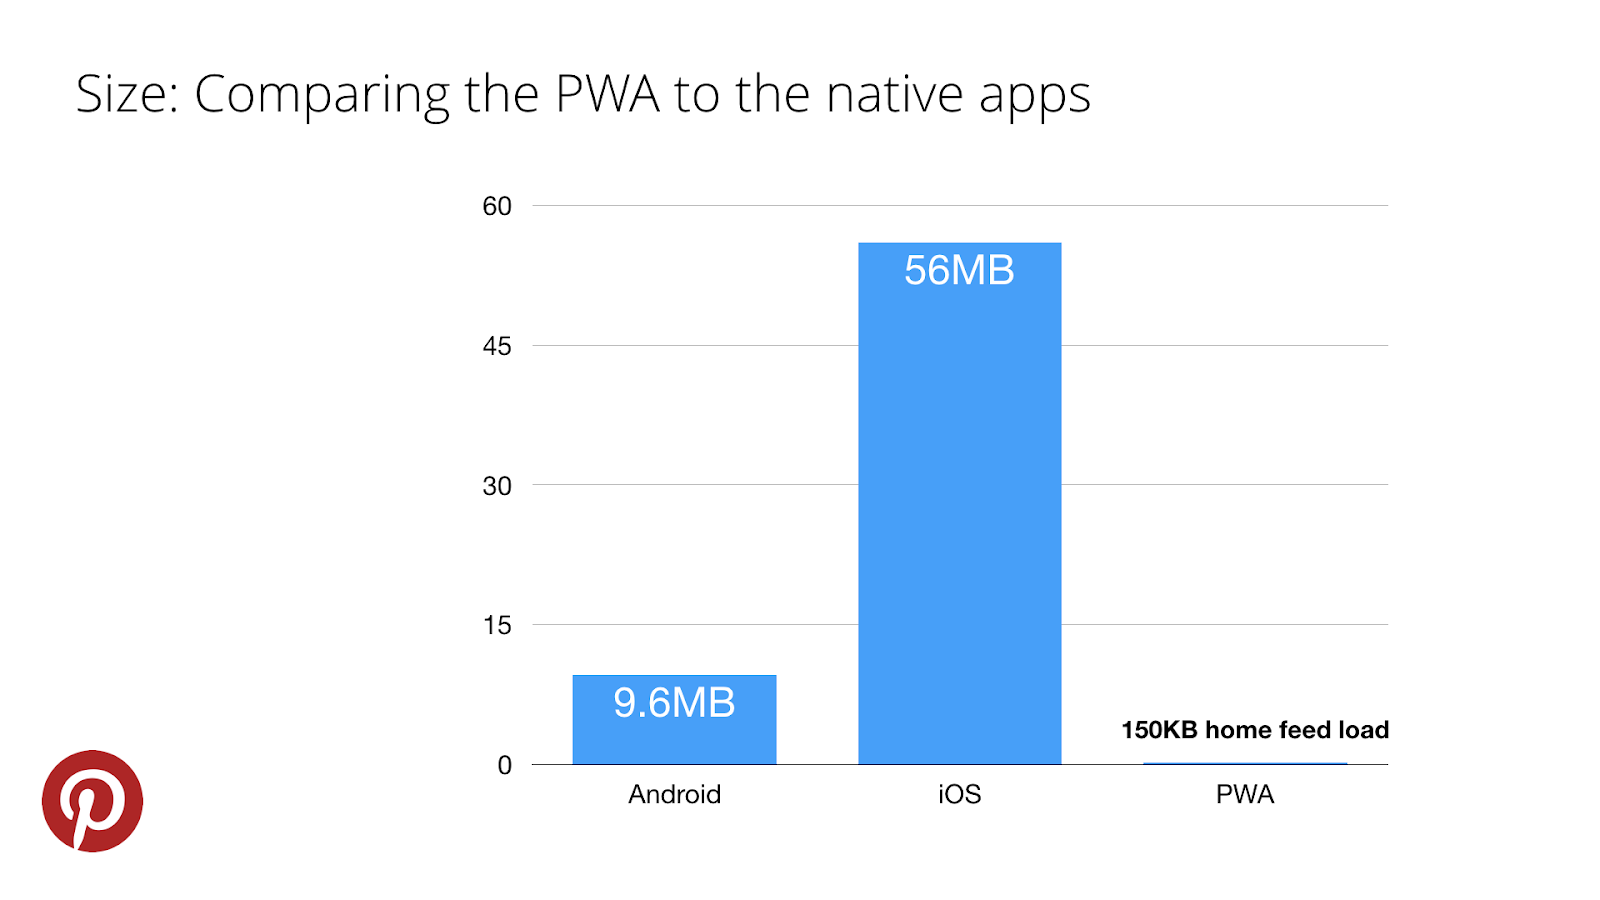 Progressive web apps consume much less space than the native ones.